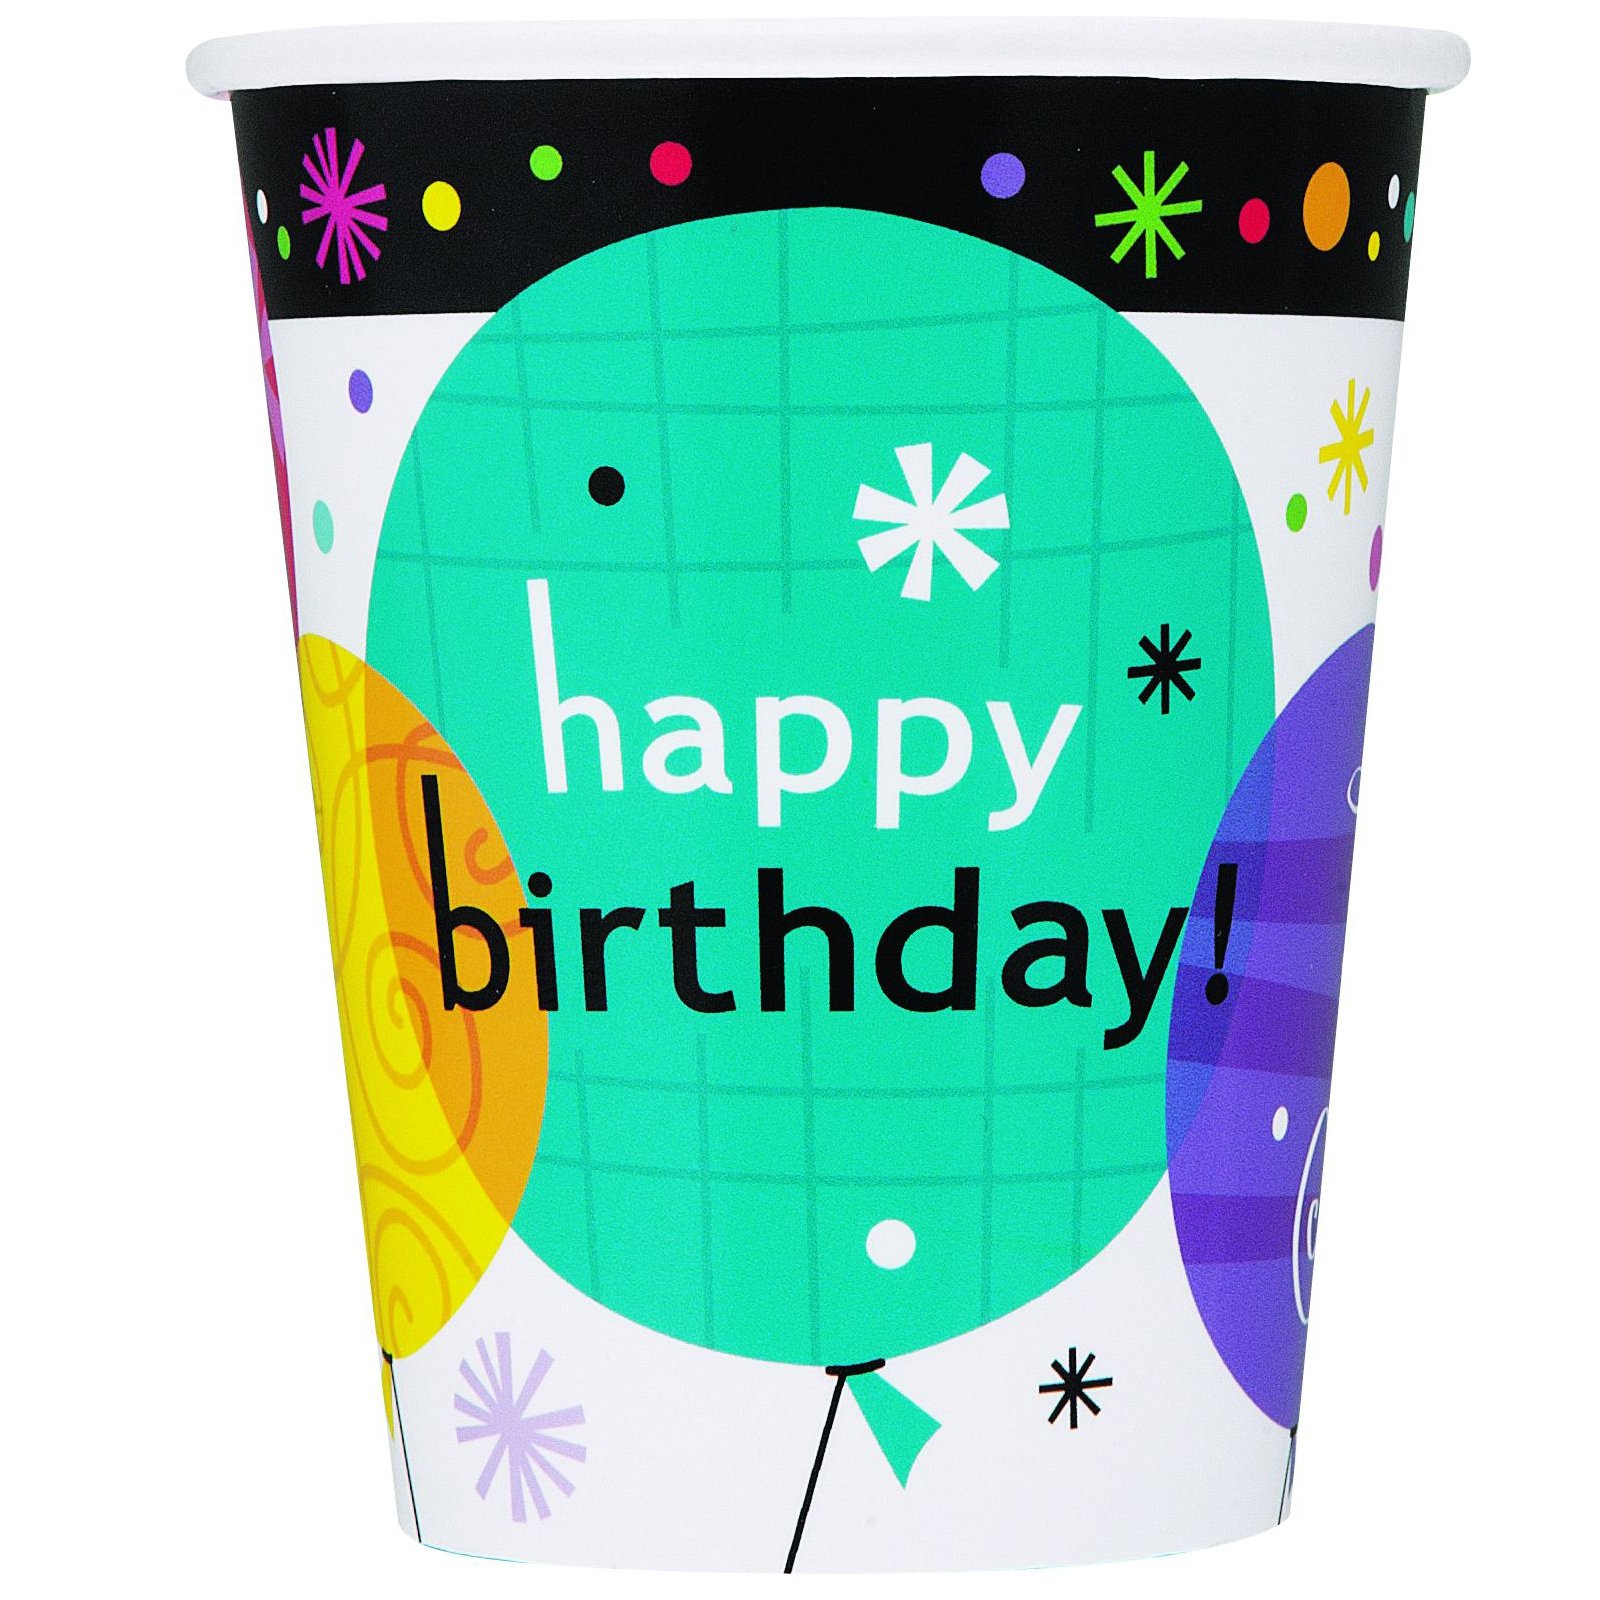 Breezy Birthday 9 oz. Paper Cups (8 count)